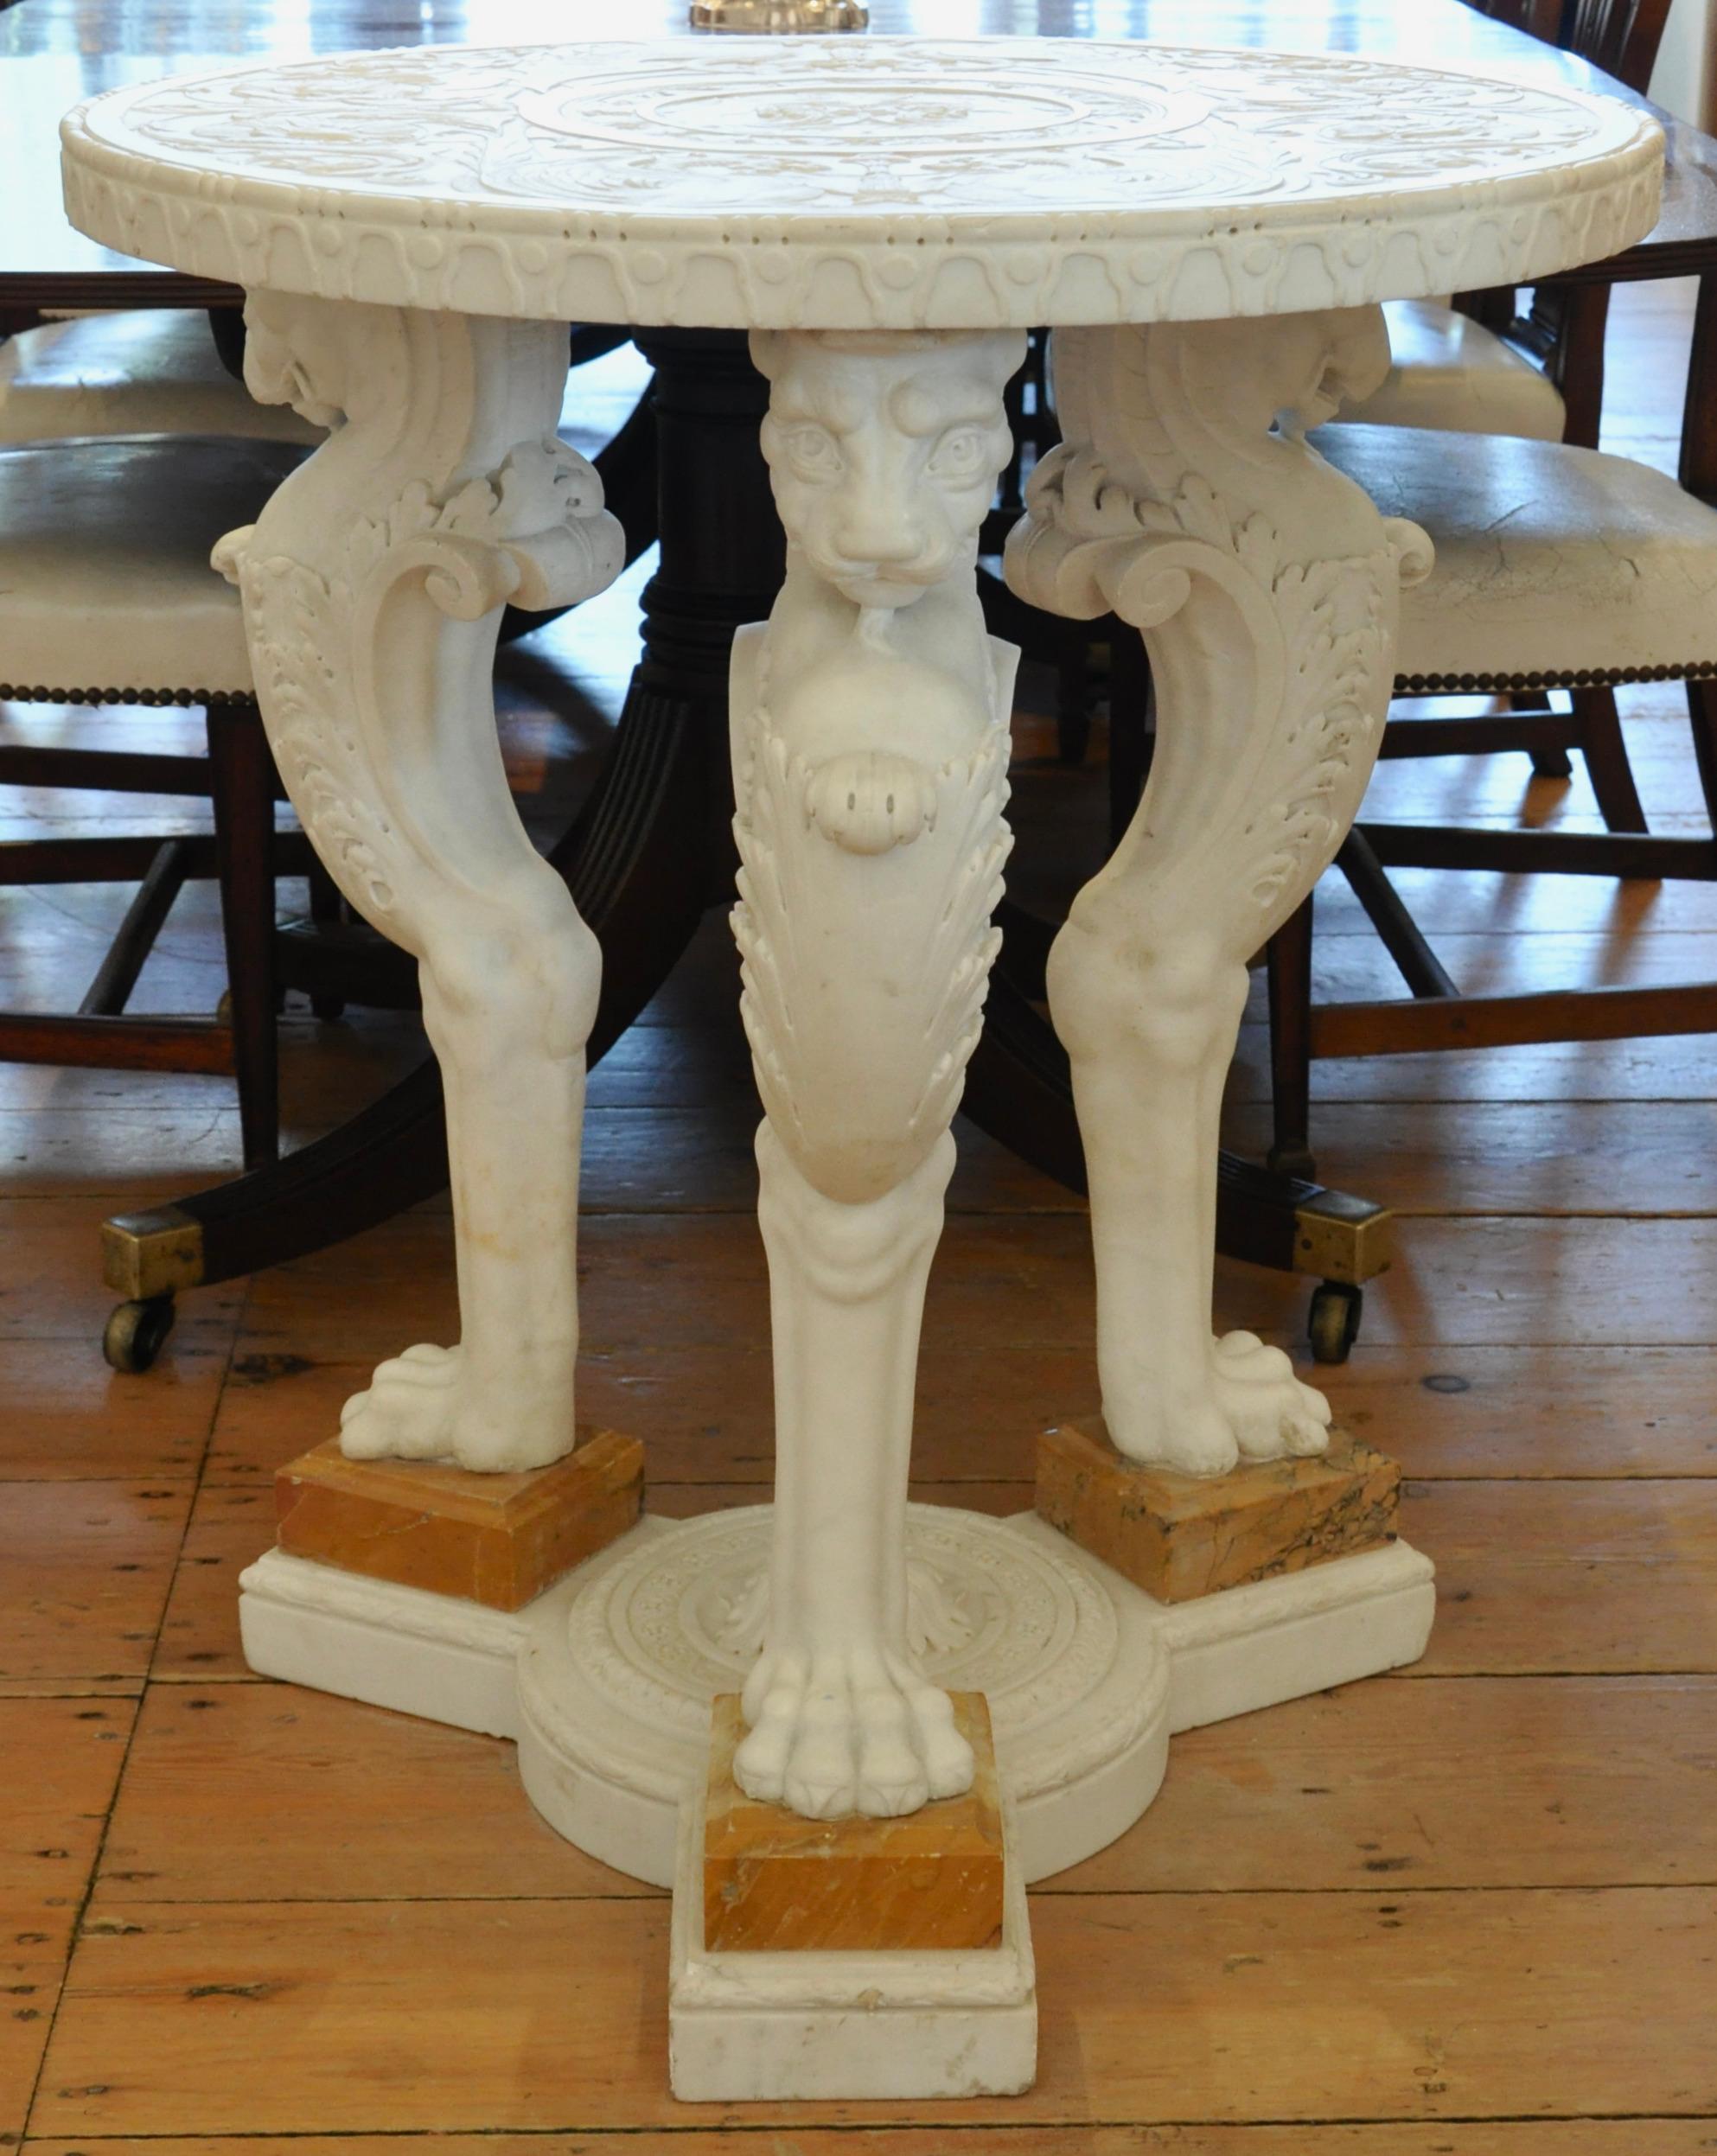 Mid 19th century carved marble gueridon in the neoclassical taste. All marble. Carved throughout. Top carved in full classical style. Monopod lion legs , tripartate base. Wonderful tracery carvings (see details). Statuario and siena marbles. Of the